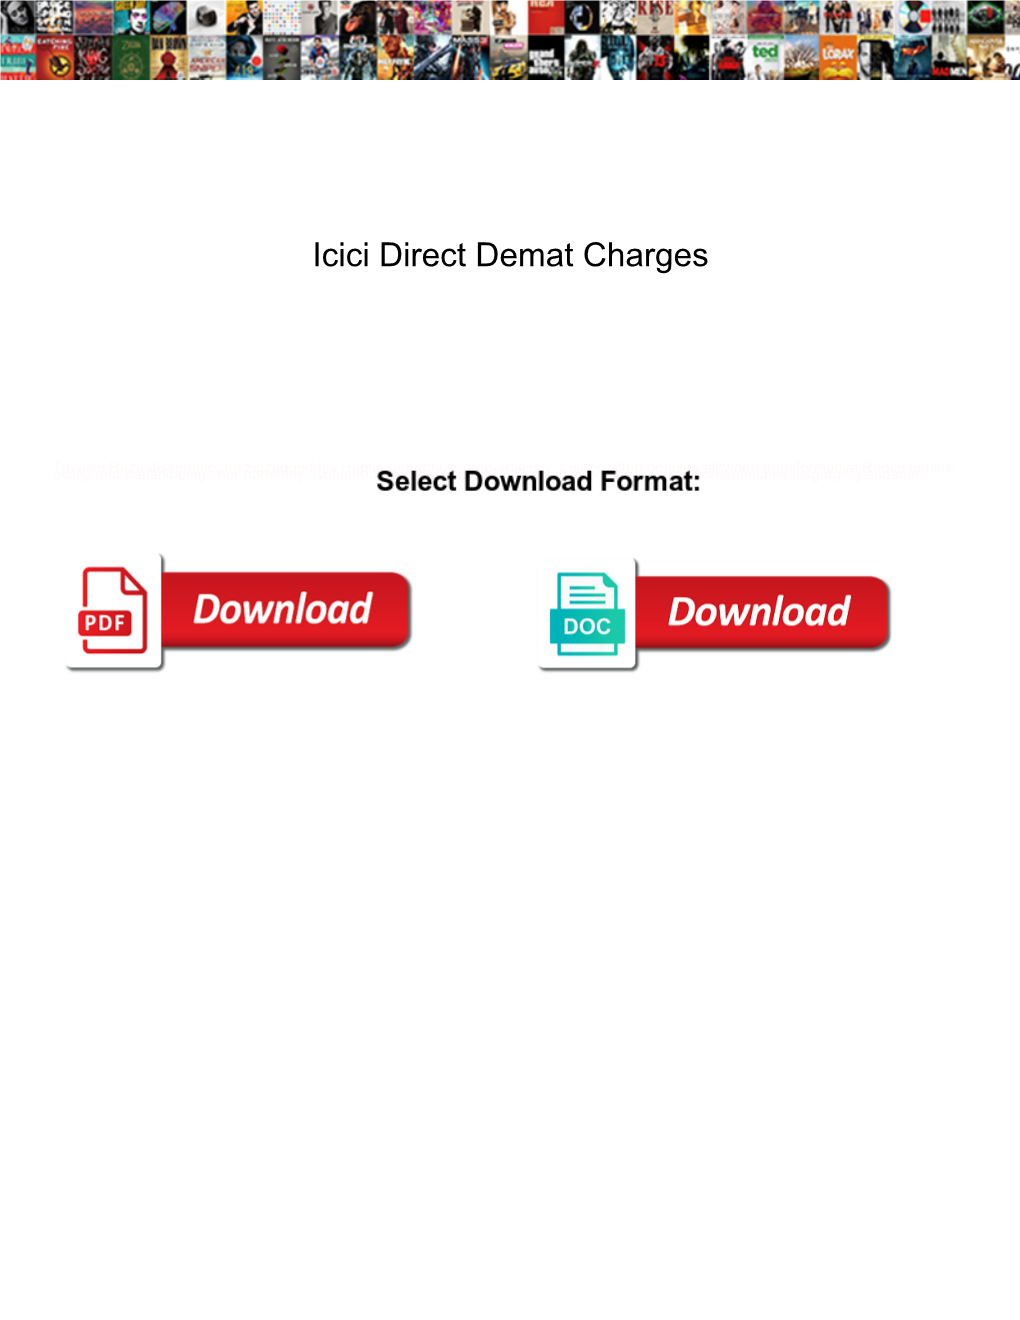 Icici Direct Demat Charges